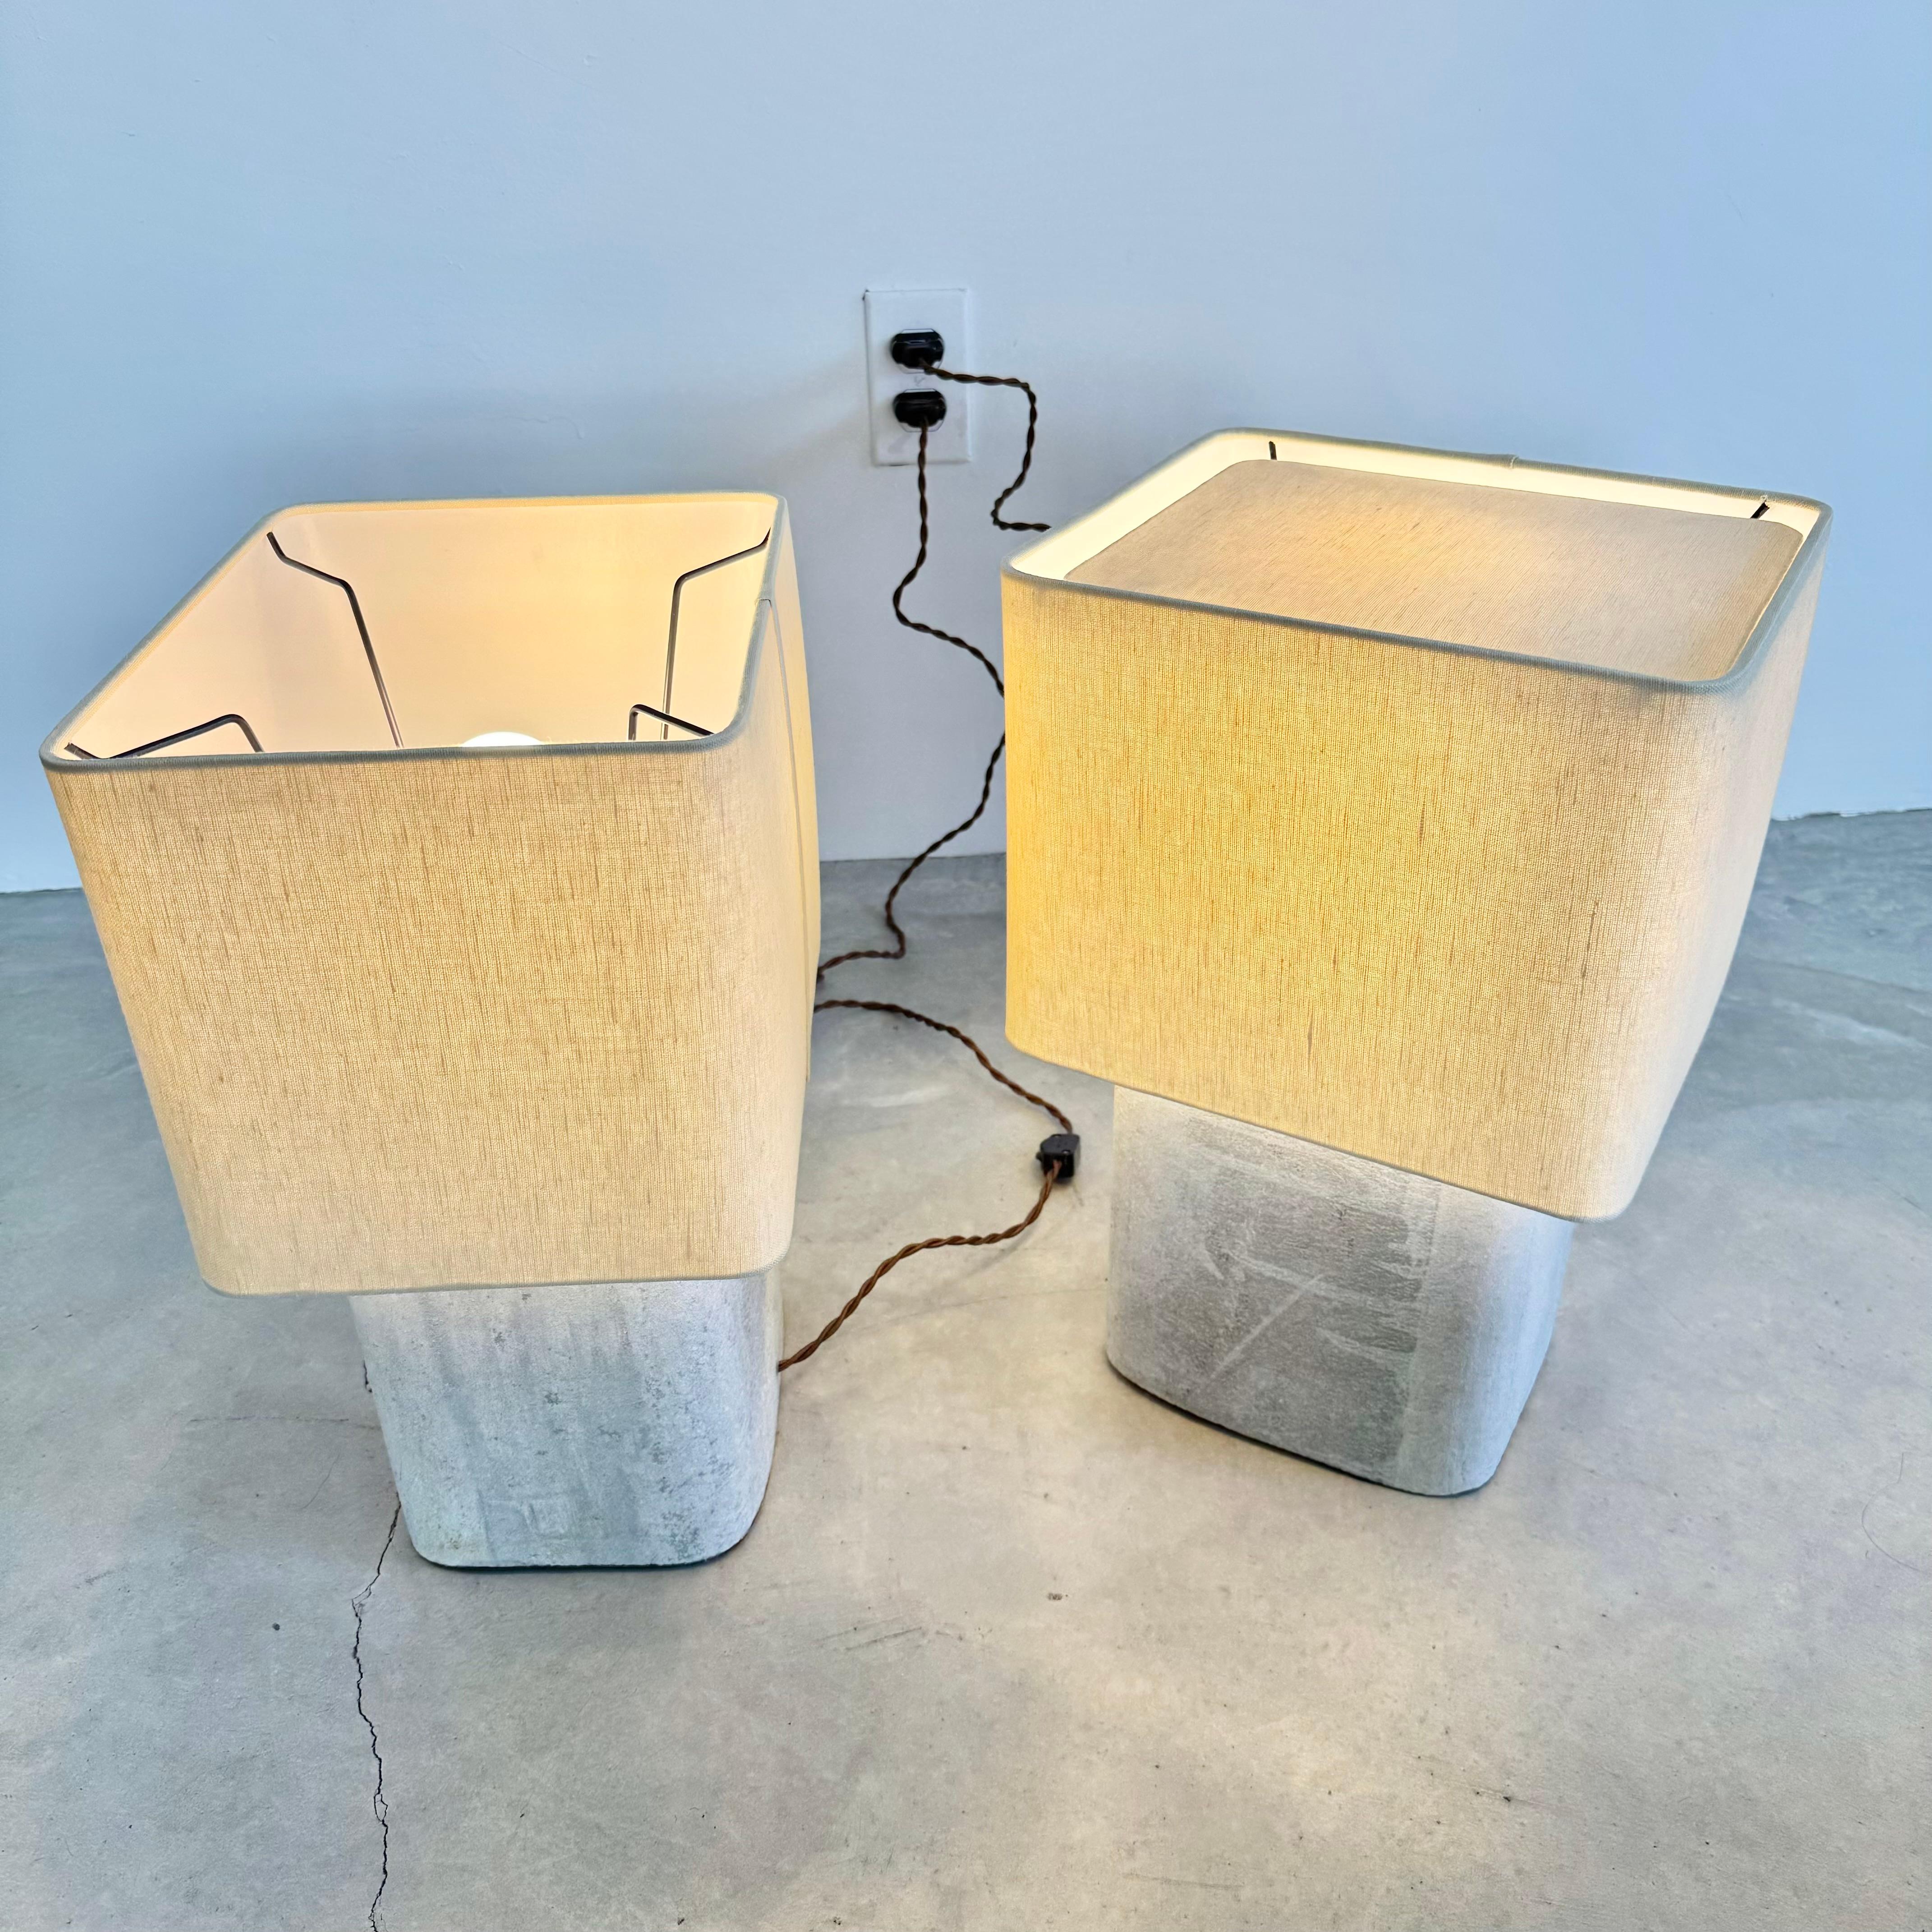 Pair of Willy Guhl Concrete Table Lamps, 1960s Switzerland For Sale 6